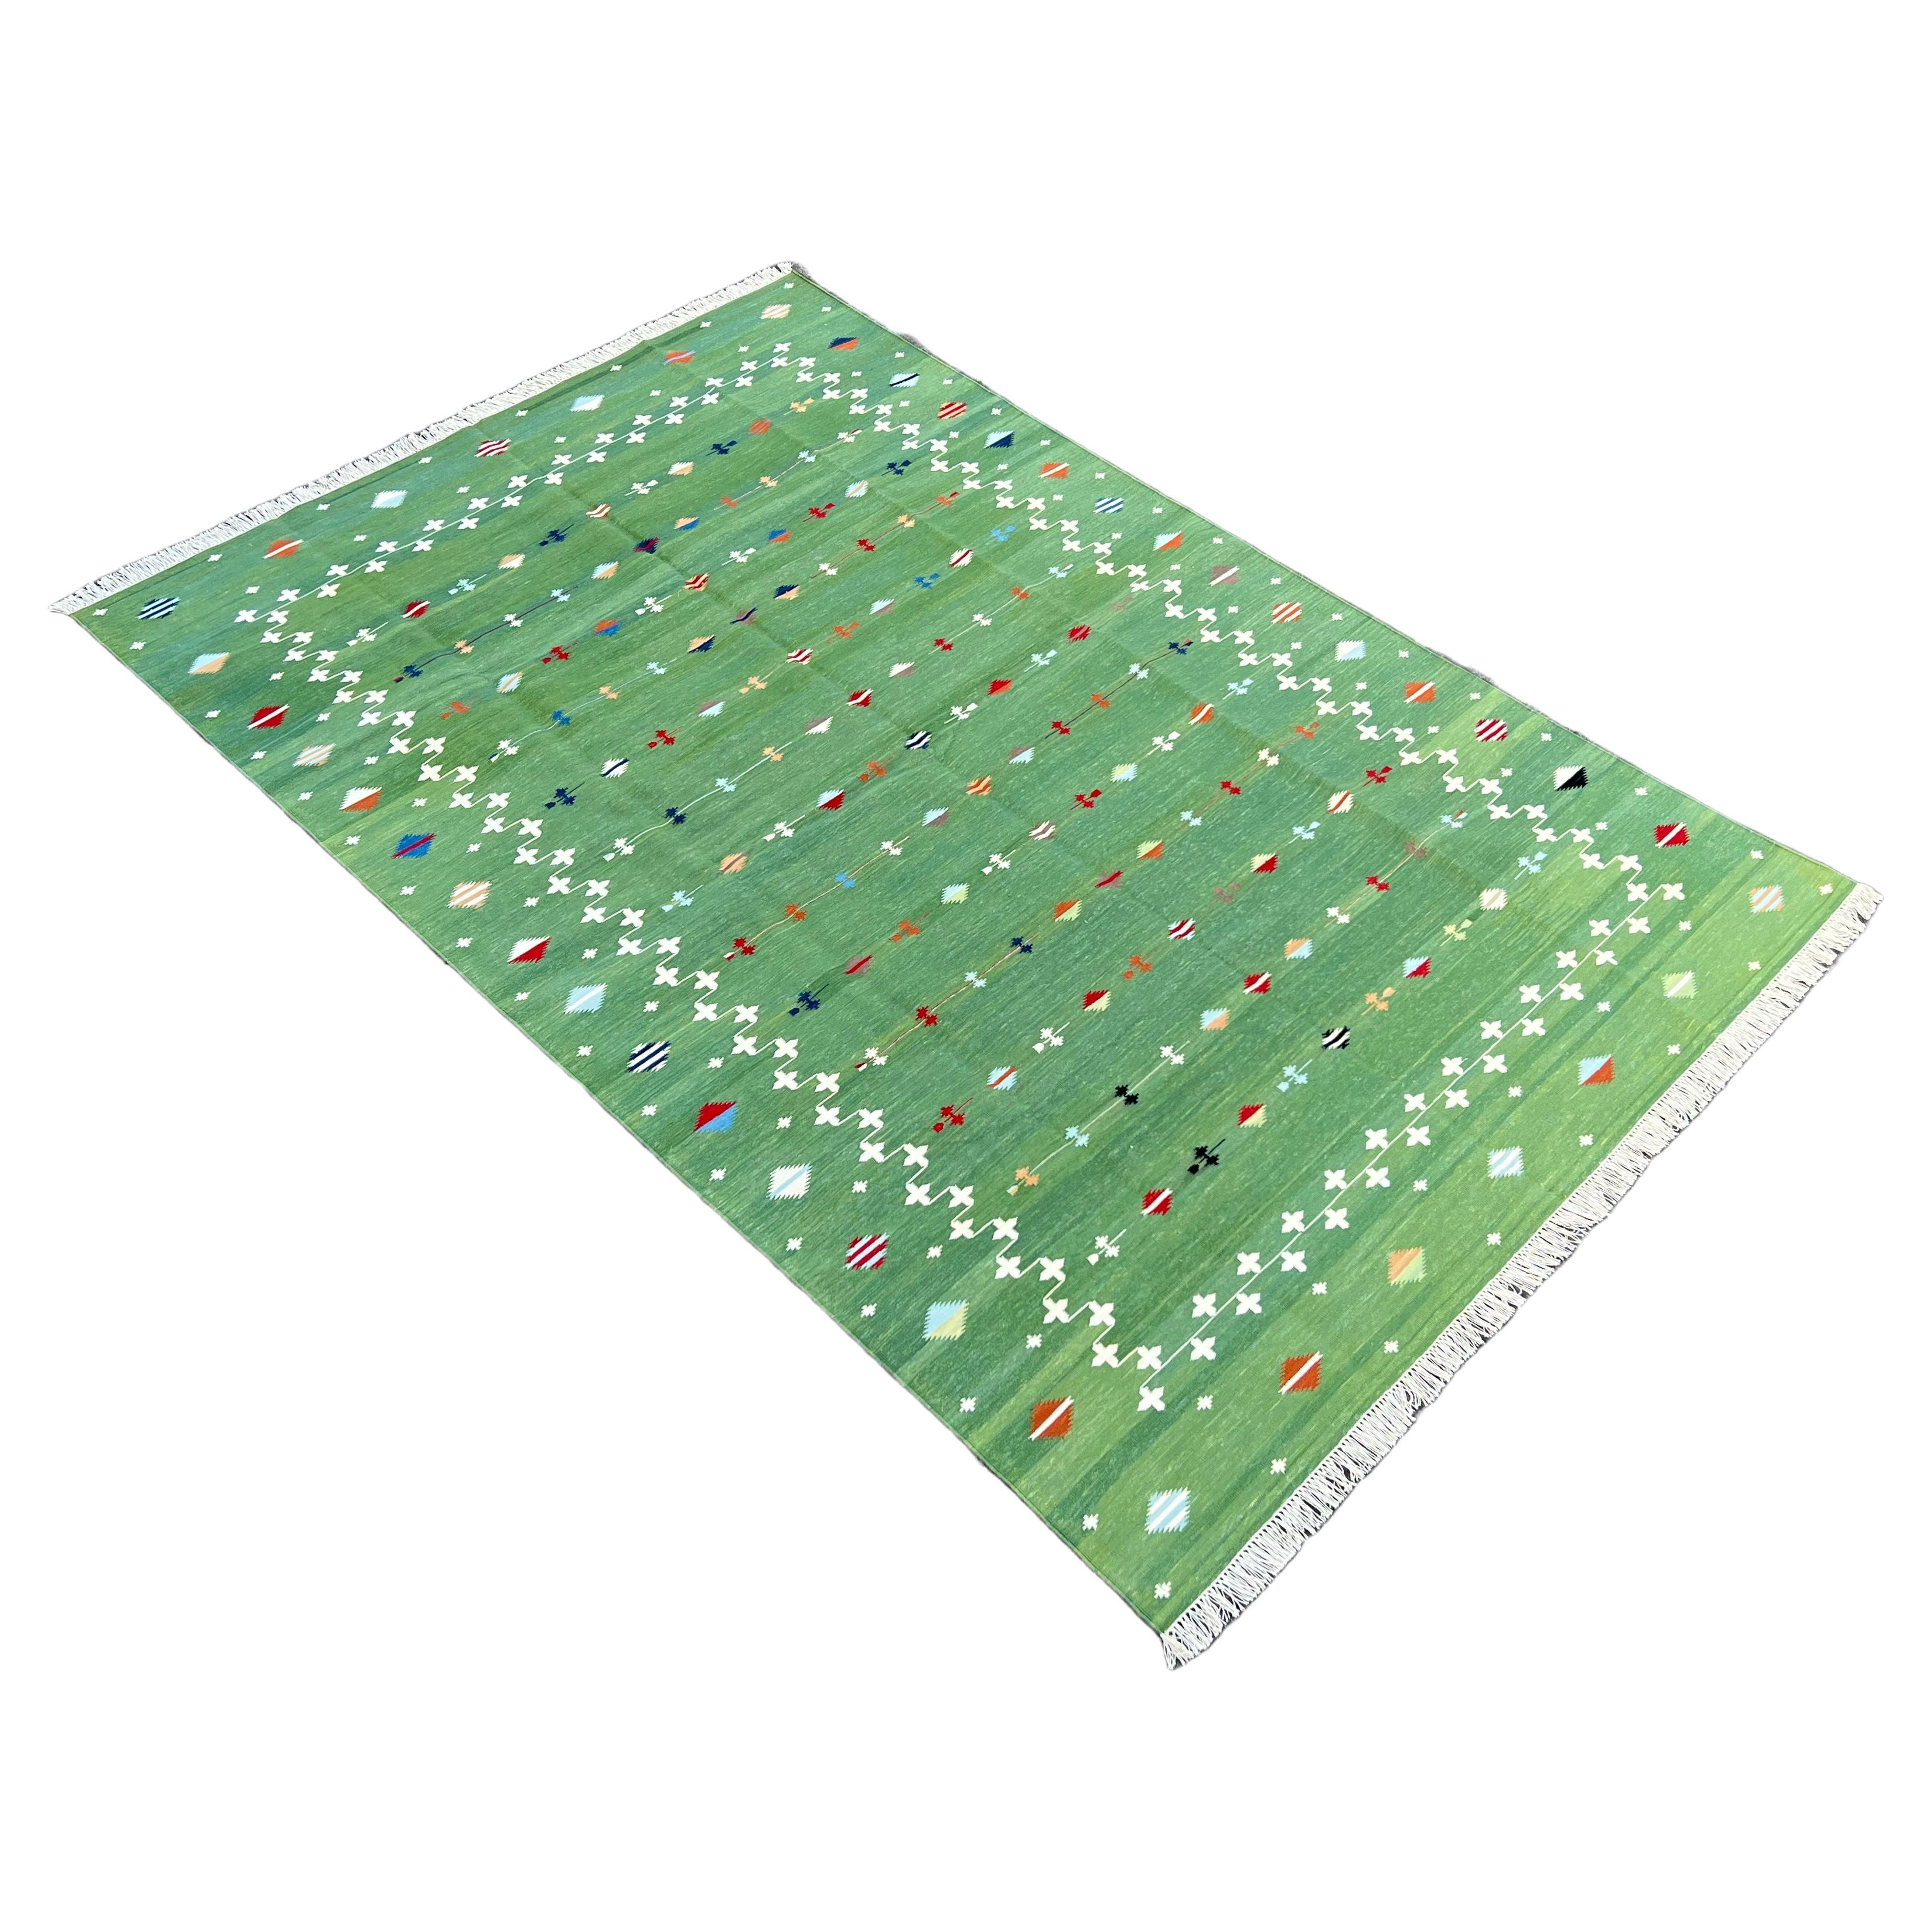 Handmade Cotton Area Flat Weave Rug, 5x7 Green And White Shooting Star Dhurrie For Sale